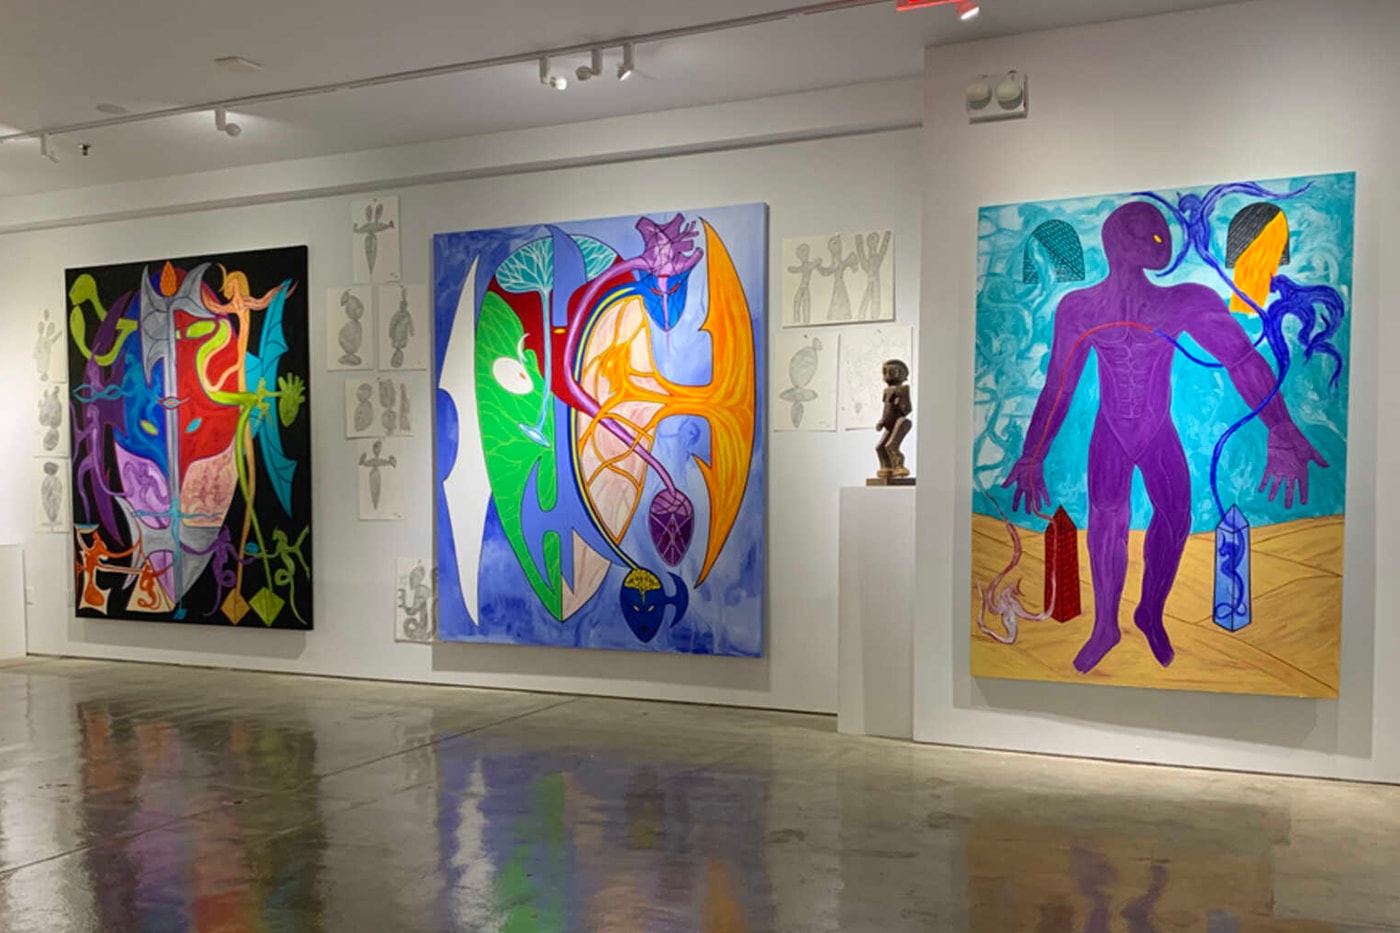 Ross Sutton Gallery Lance De Los Reyes "PAST is PRESENT is FUTURE" Solo Exhibition New York